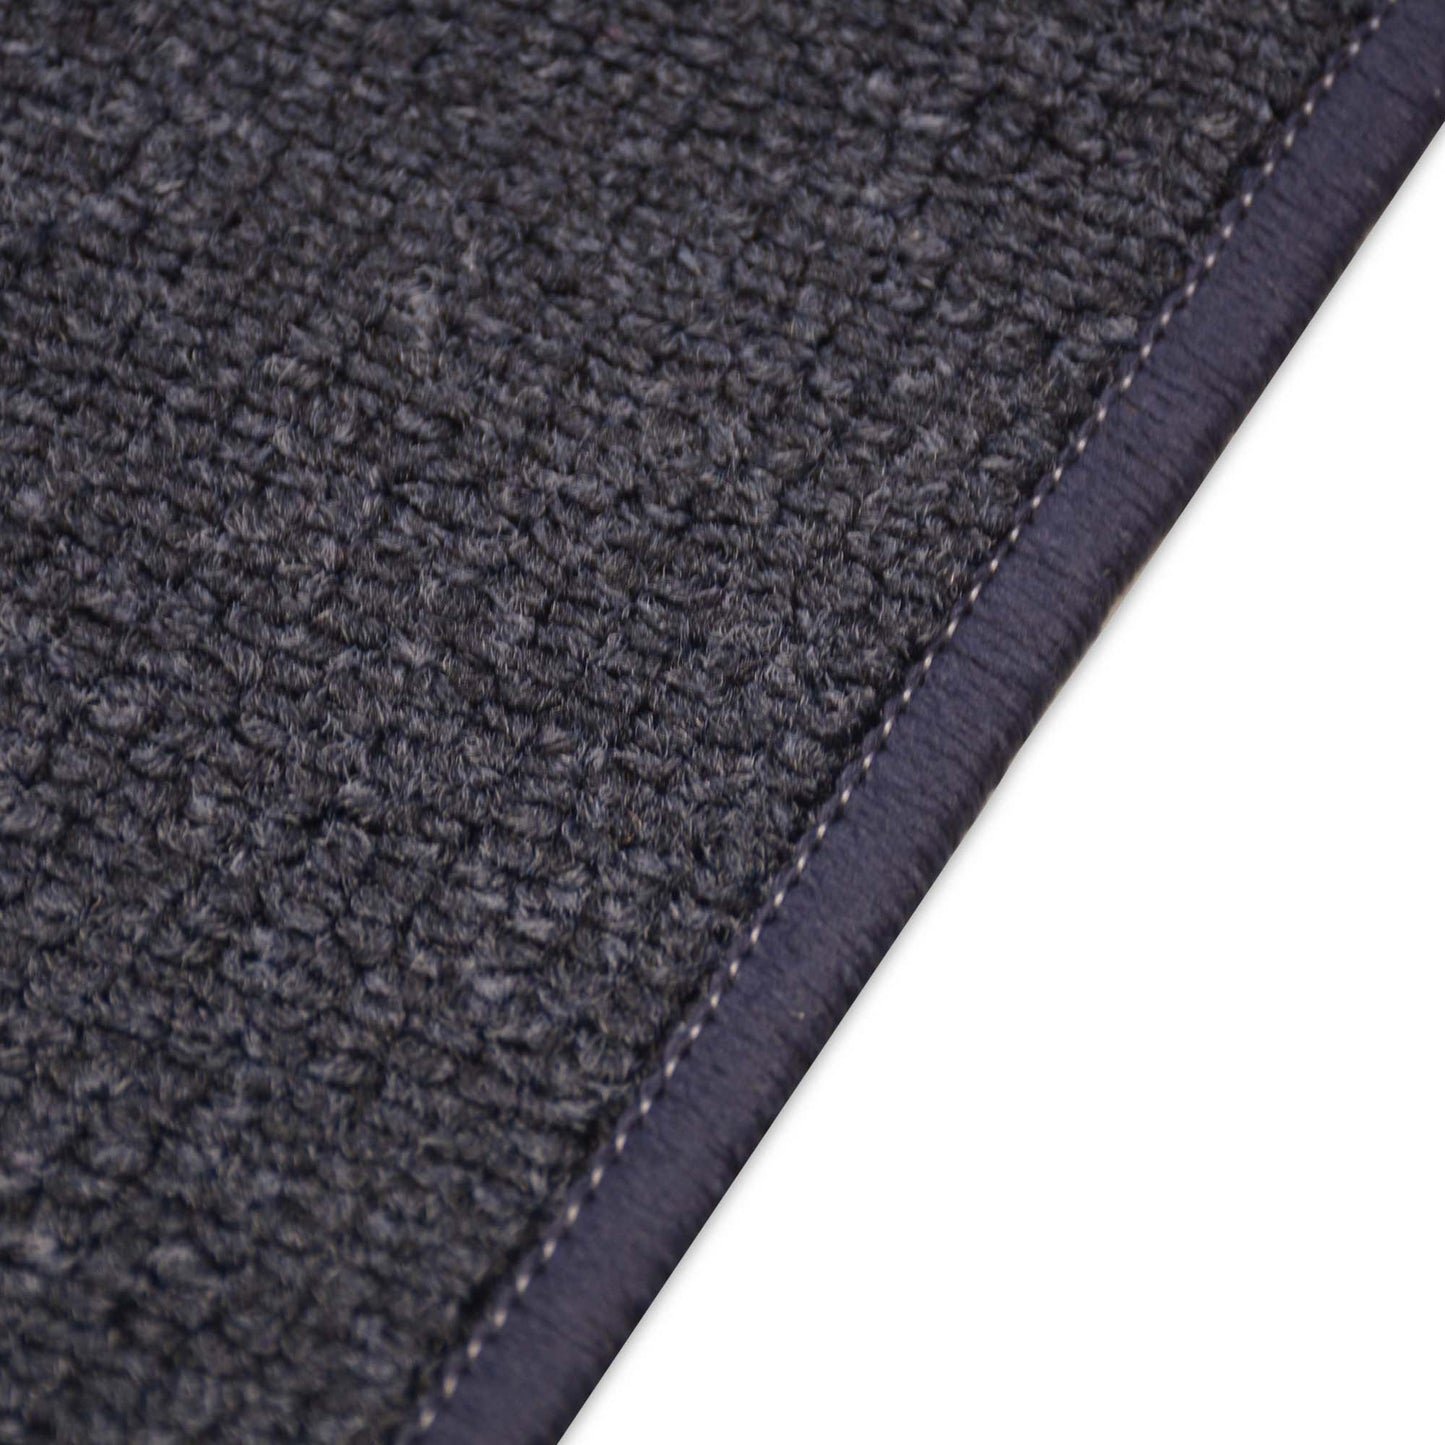 Machine Washable Custom Size Runner Rug Berber Solid Dark Navy Blue Skid Resistant Area Rug Runners Customize By Feet and 26 inch Width